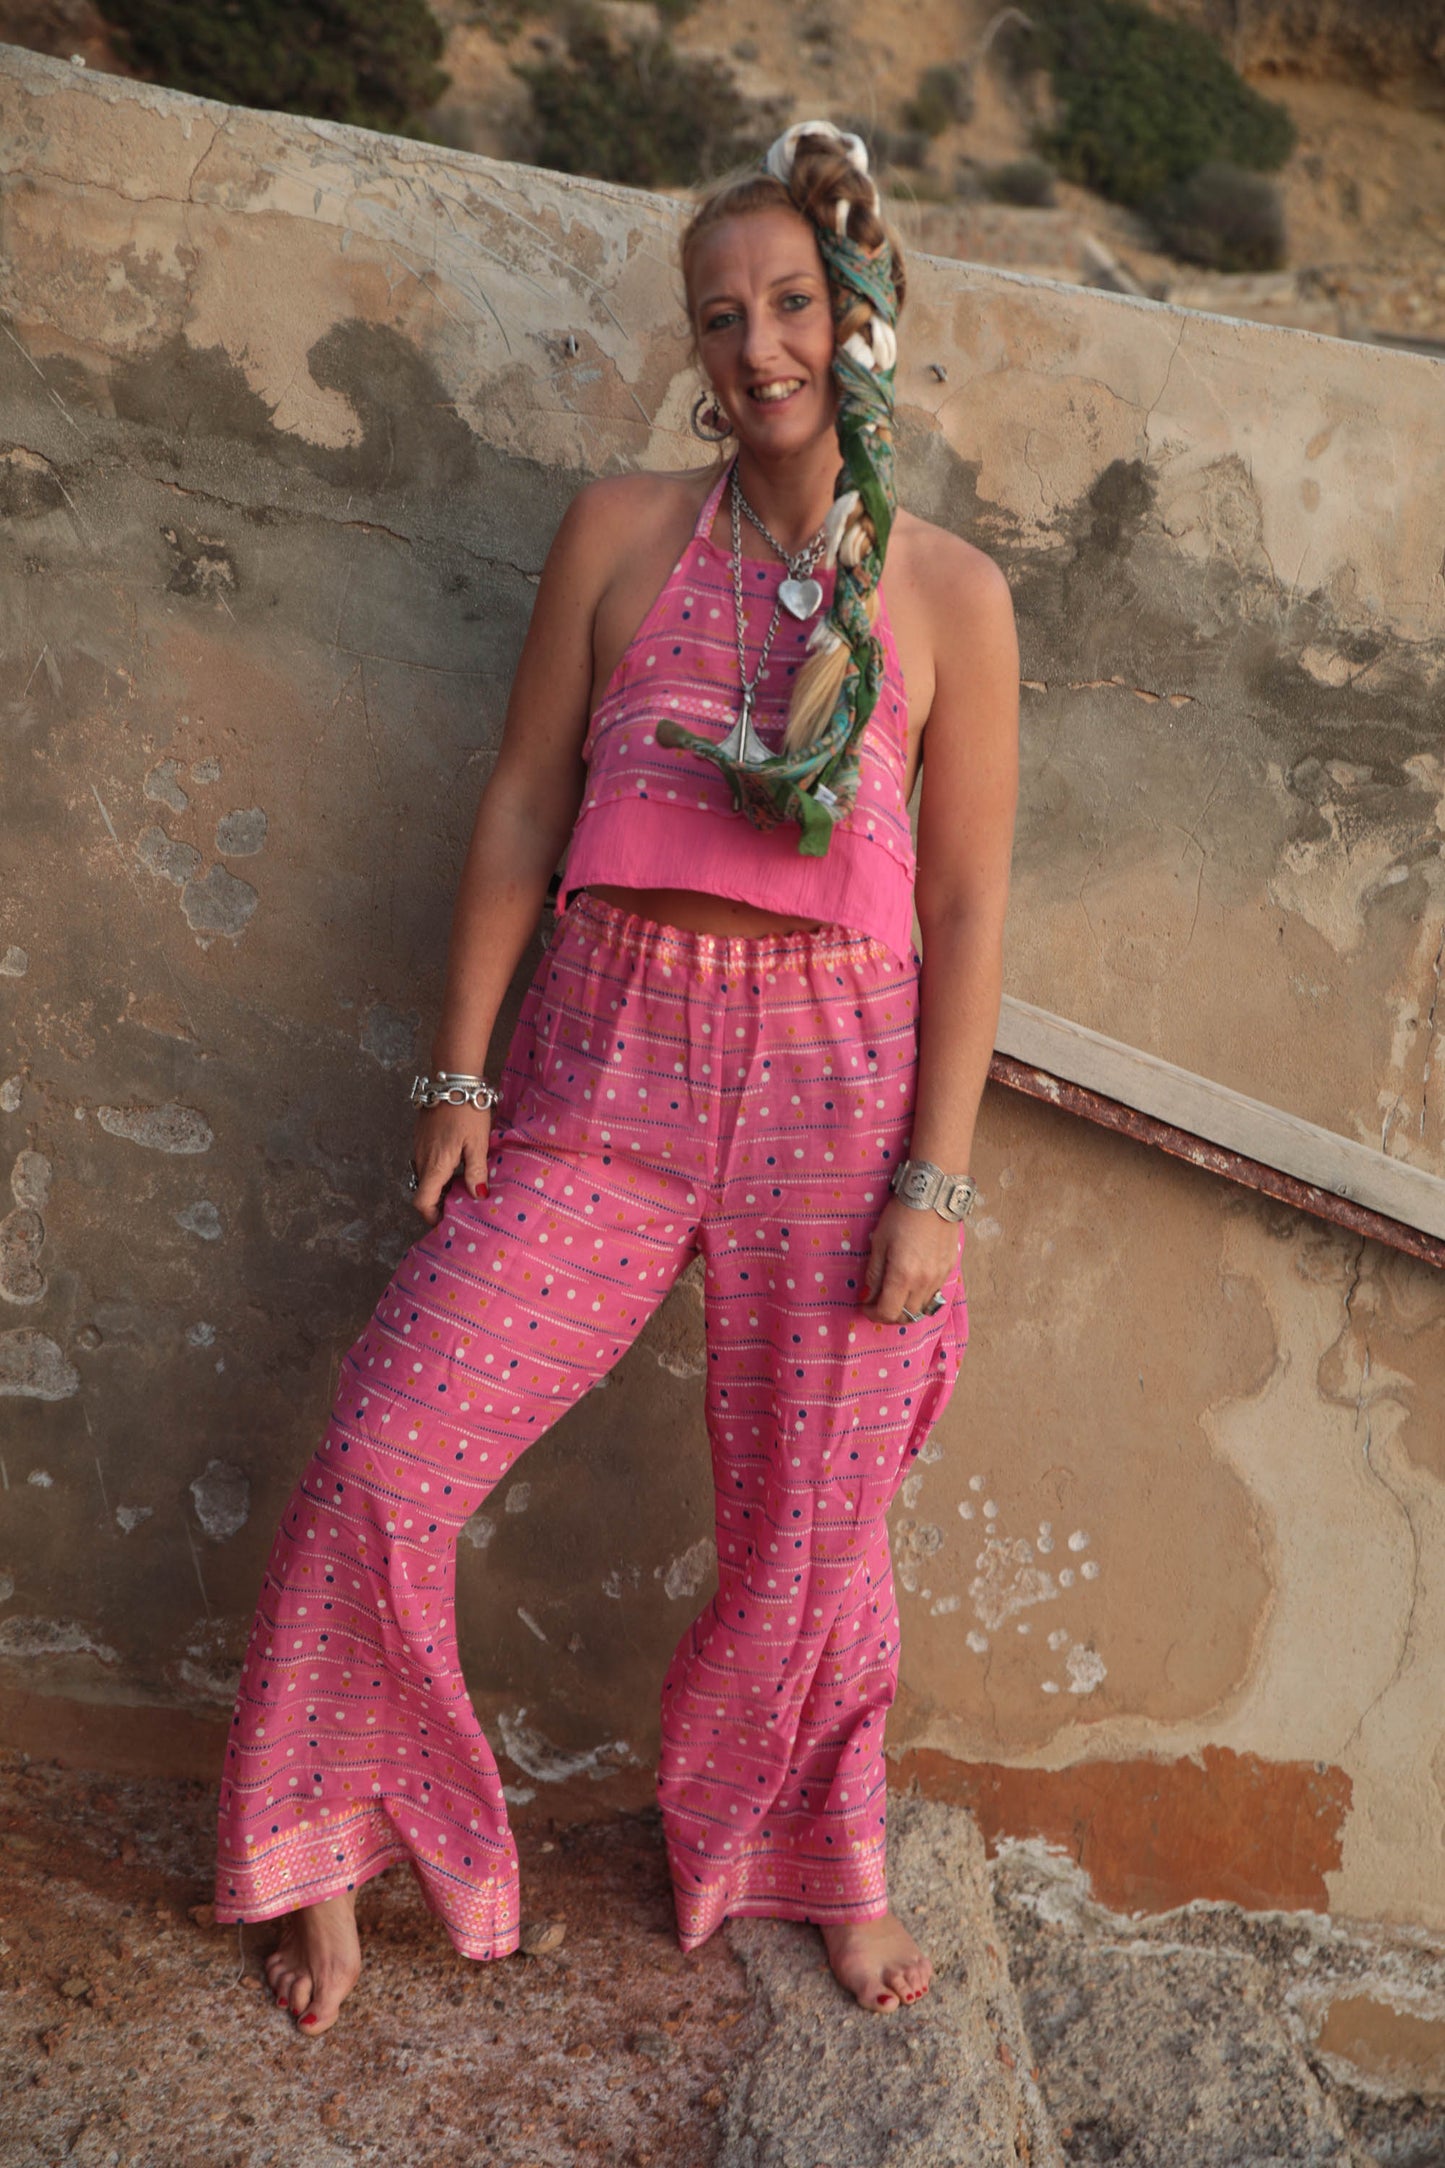 Up-cycled vintage cotton 2 piece set tie top and pants in super thin lightweight pink printed cotton perfect for beach days and vibes around Ibiza town.